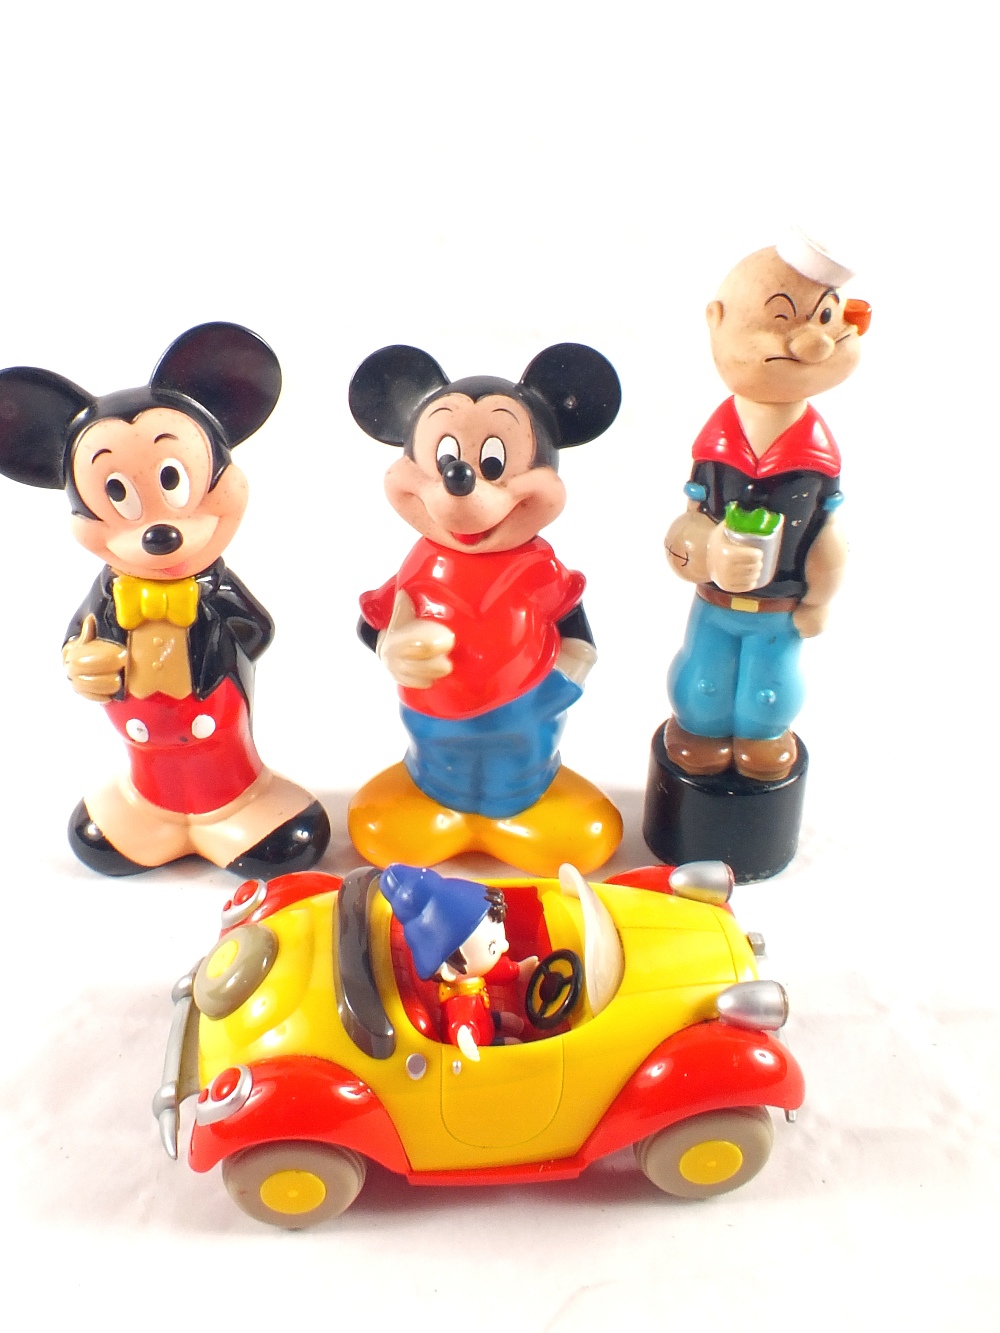 A battery operated Noddy in his car plus three Disney characters (one Popeye and two Mickey Mouse)